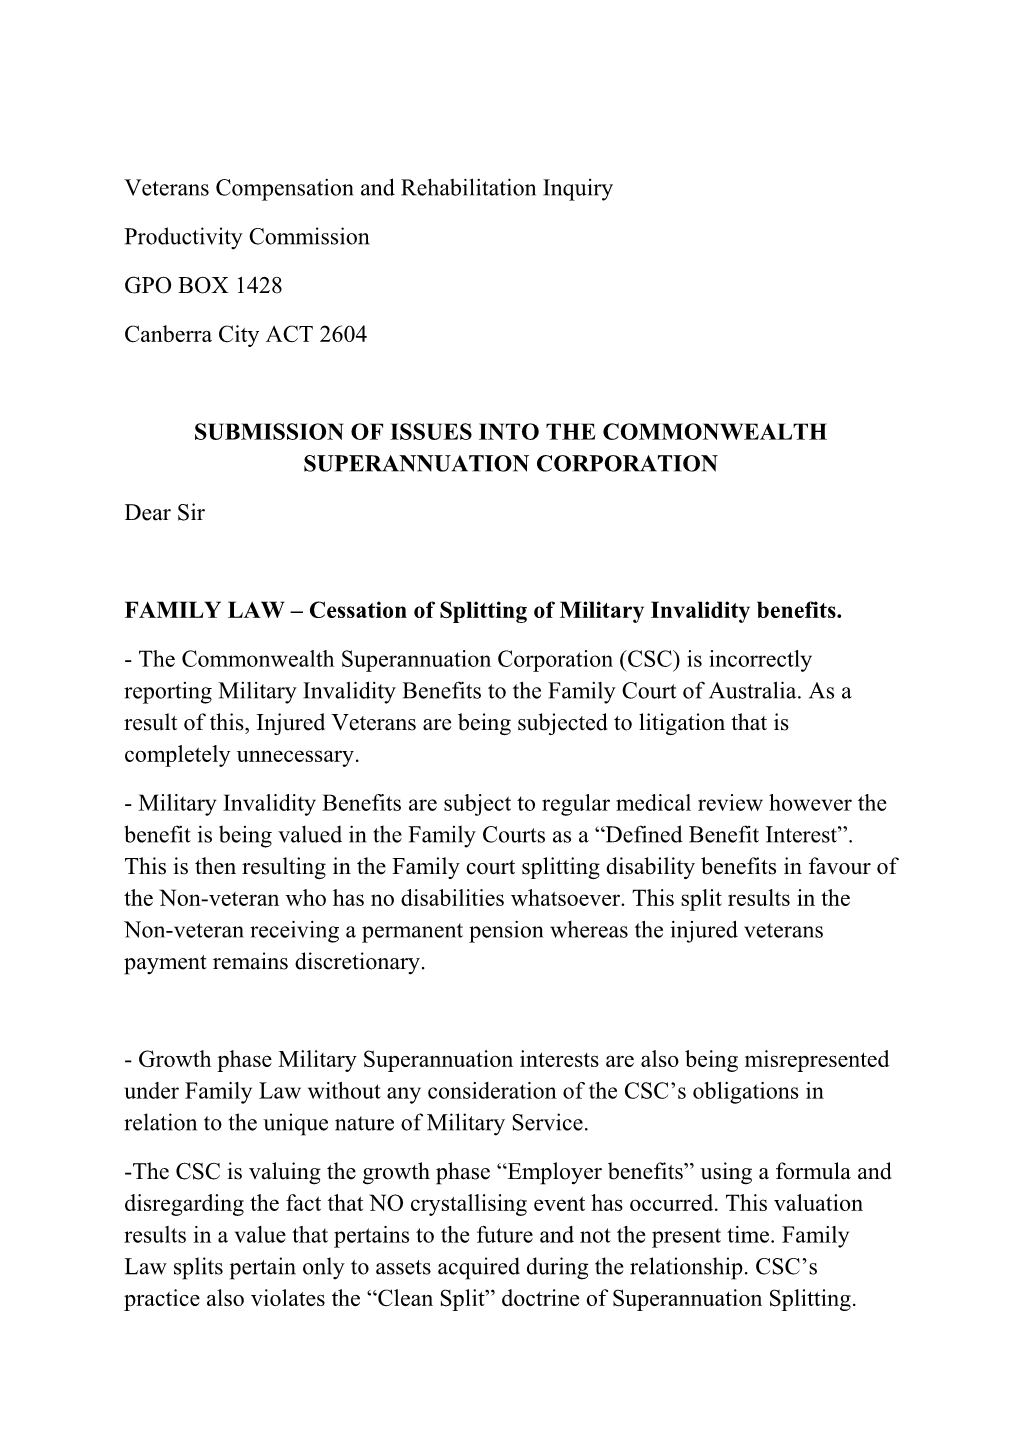 Submission 28 - Multiple - Compensation and Rehabilitation for Veterans - Public Inquiry